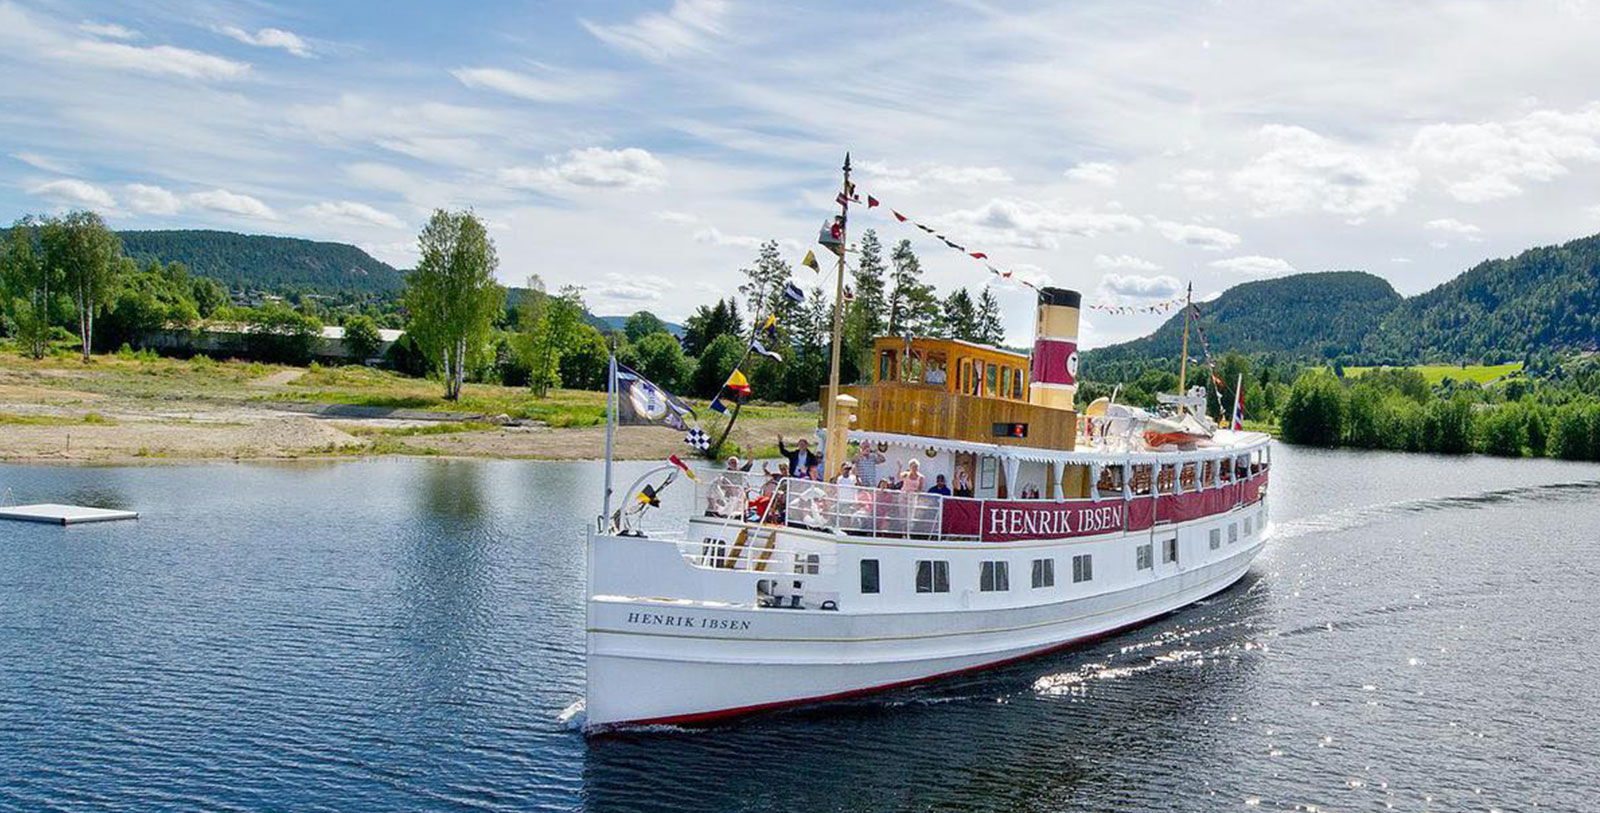 Experience the historic Telemark Canal just beyond the hotel’s front door.